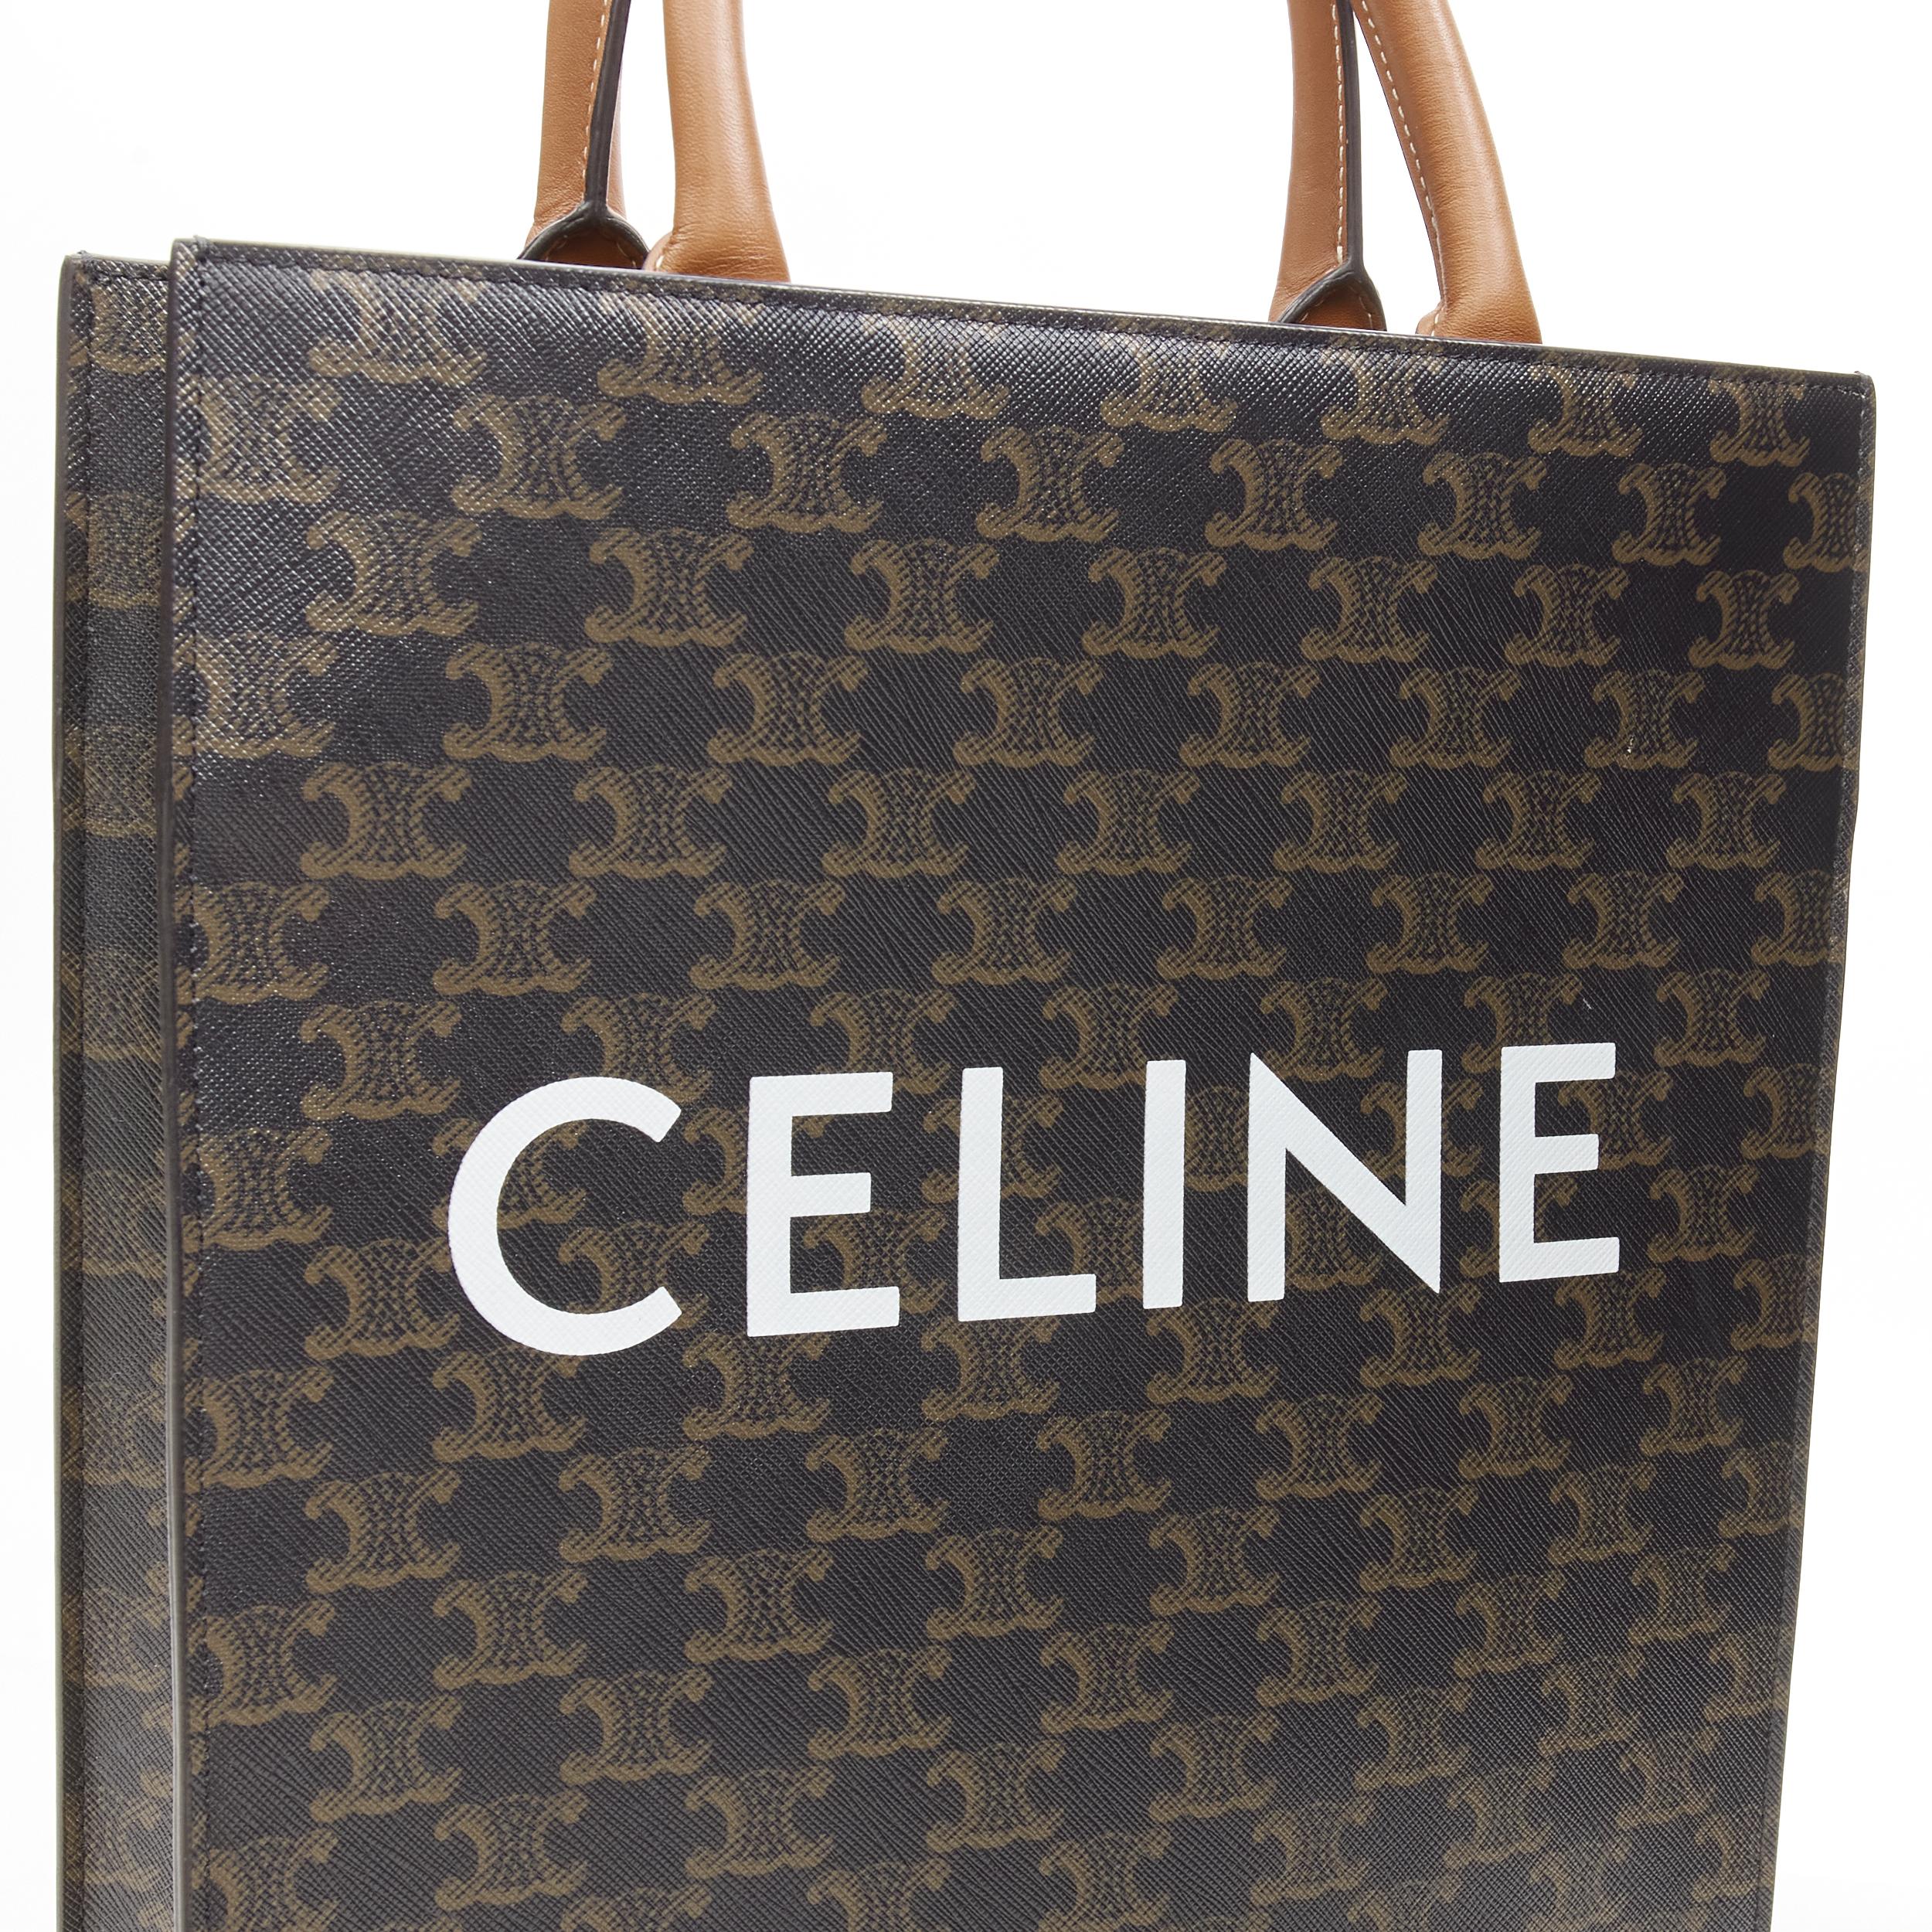 CELINE Hedi Slimane Triomphe Canvas brown monogram Vertical Cabas tote bag In Excellent Condition For Sale In Hong Kong, NT